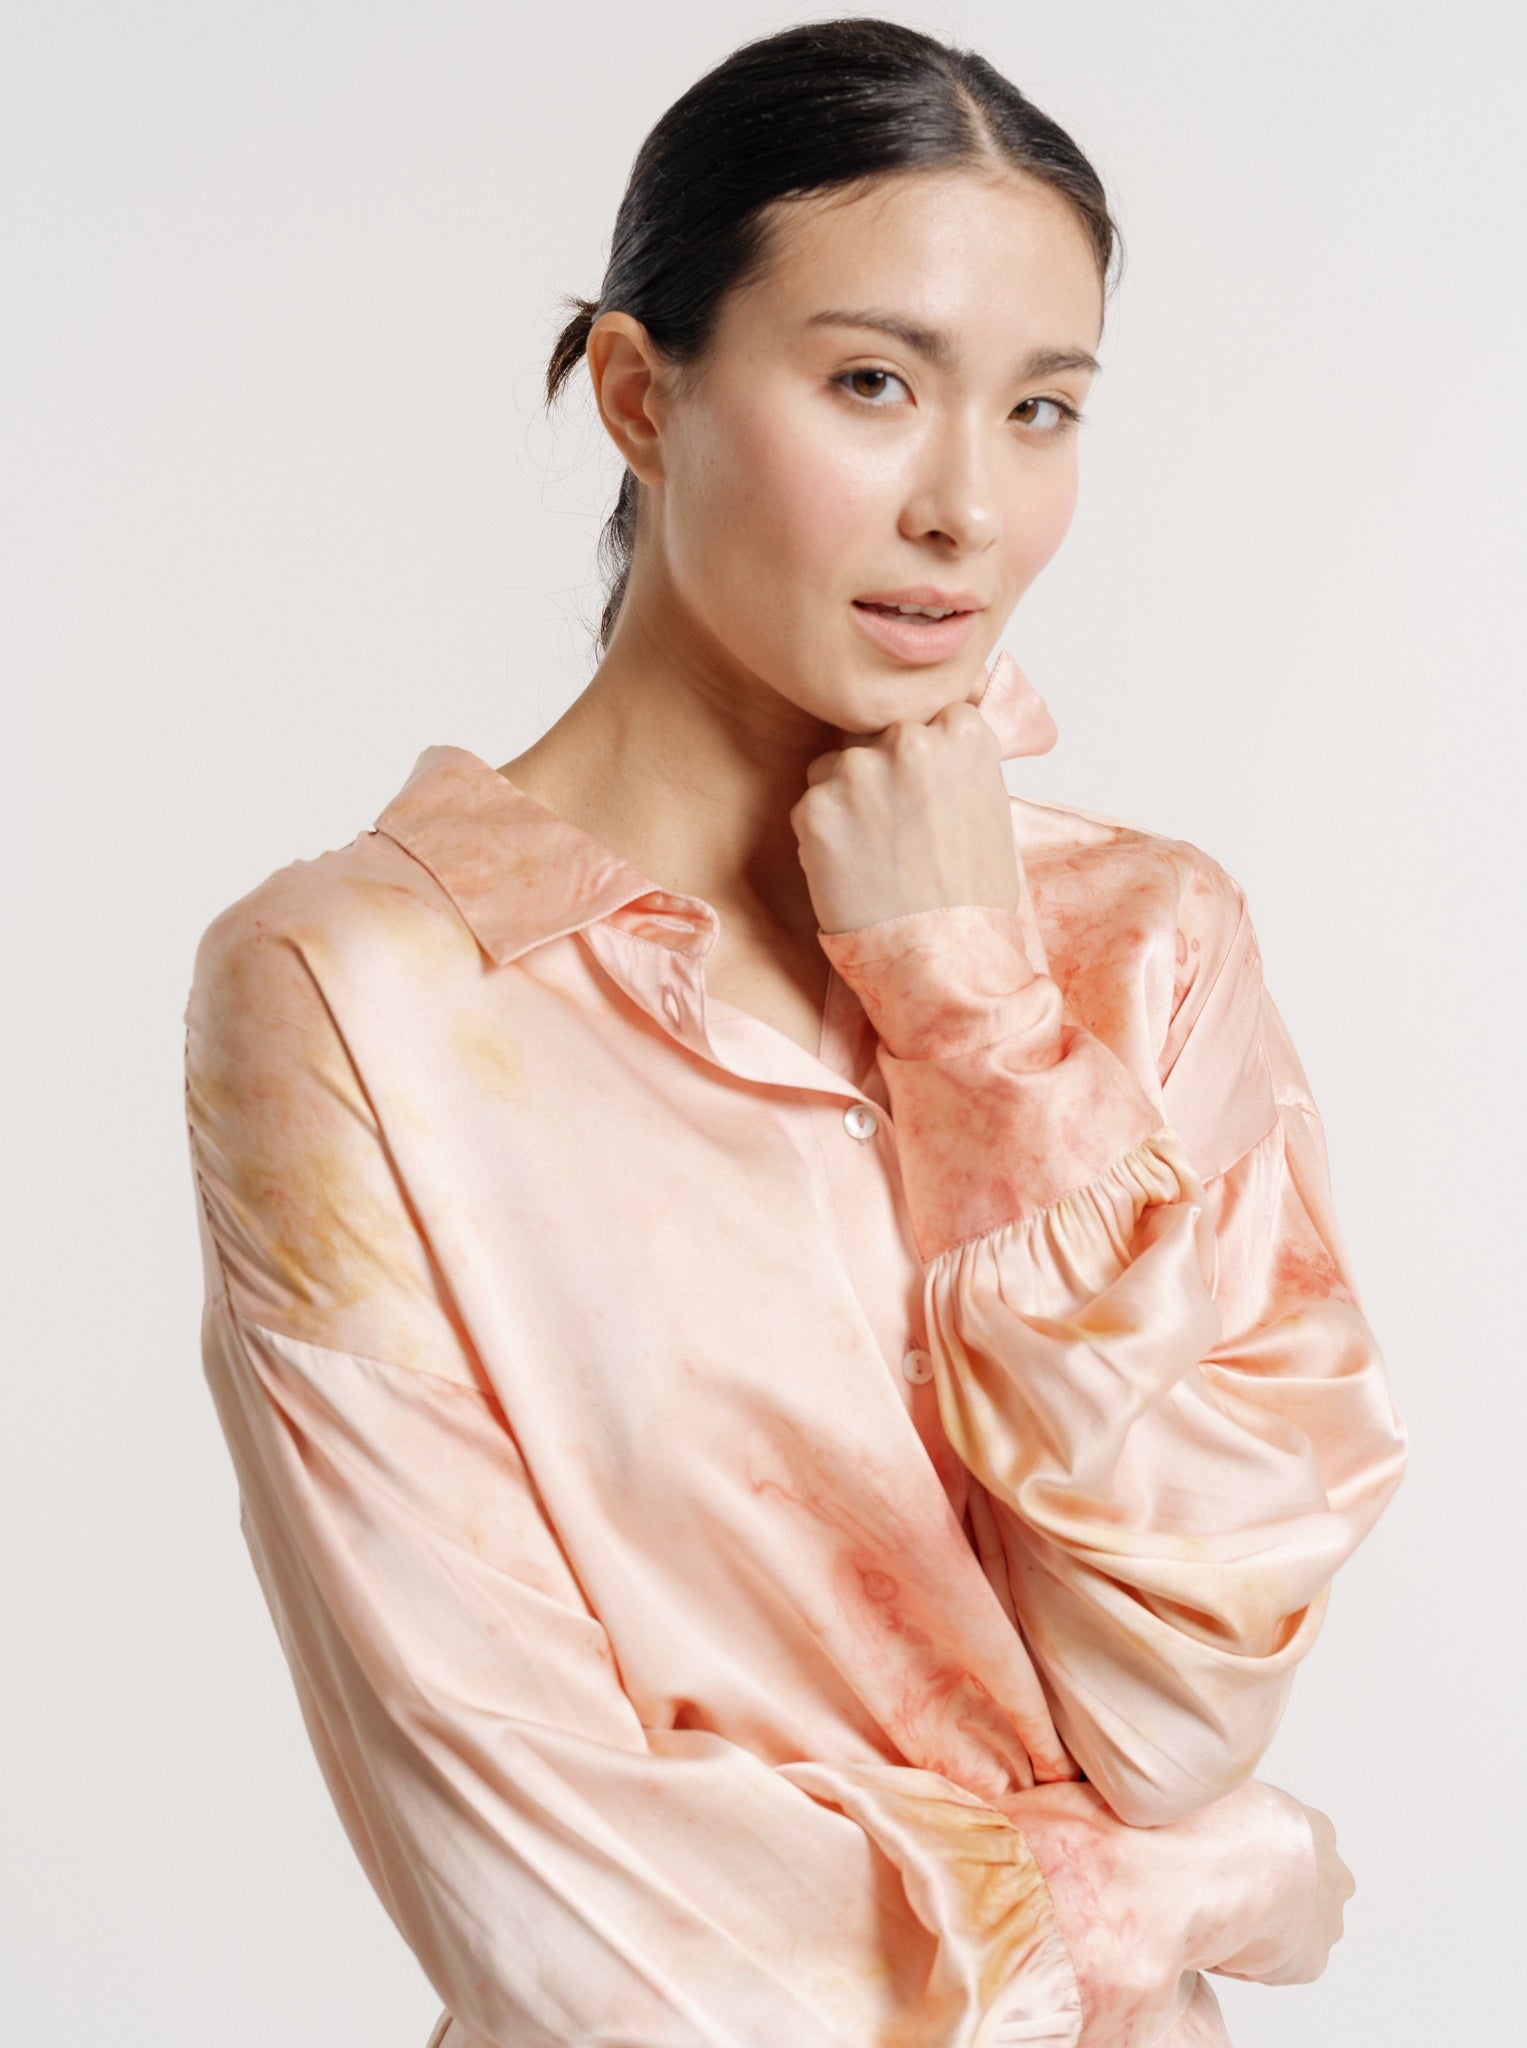 A woman in a 100% silk, Museo Silk Button Up - Botanical Ice Dye blouse is posing with her hand on her chin.